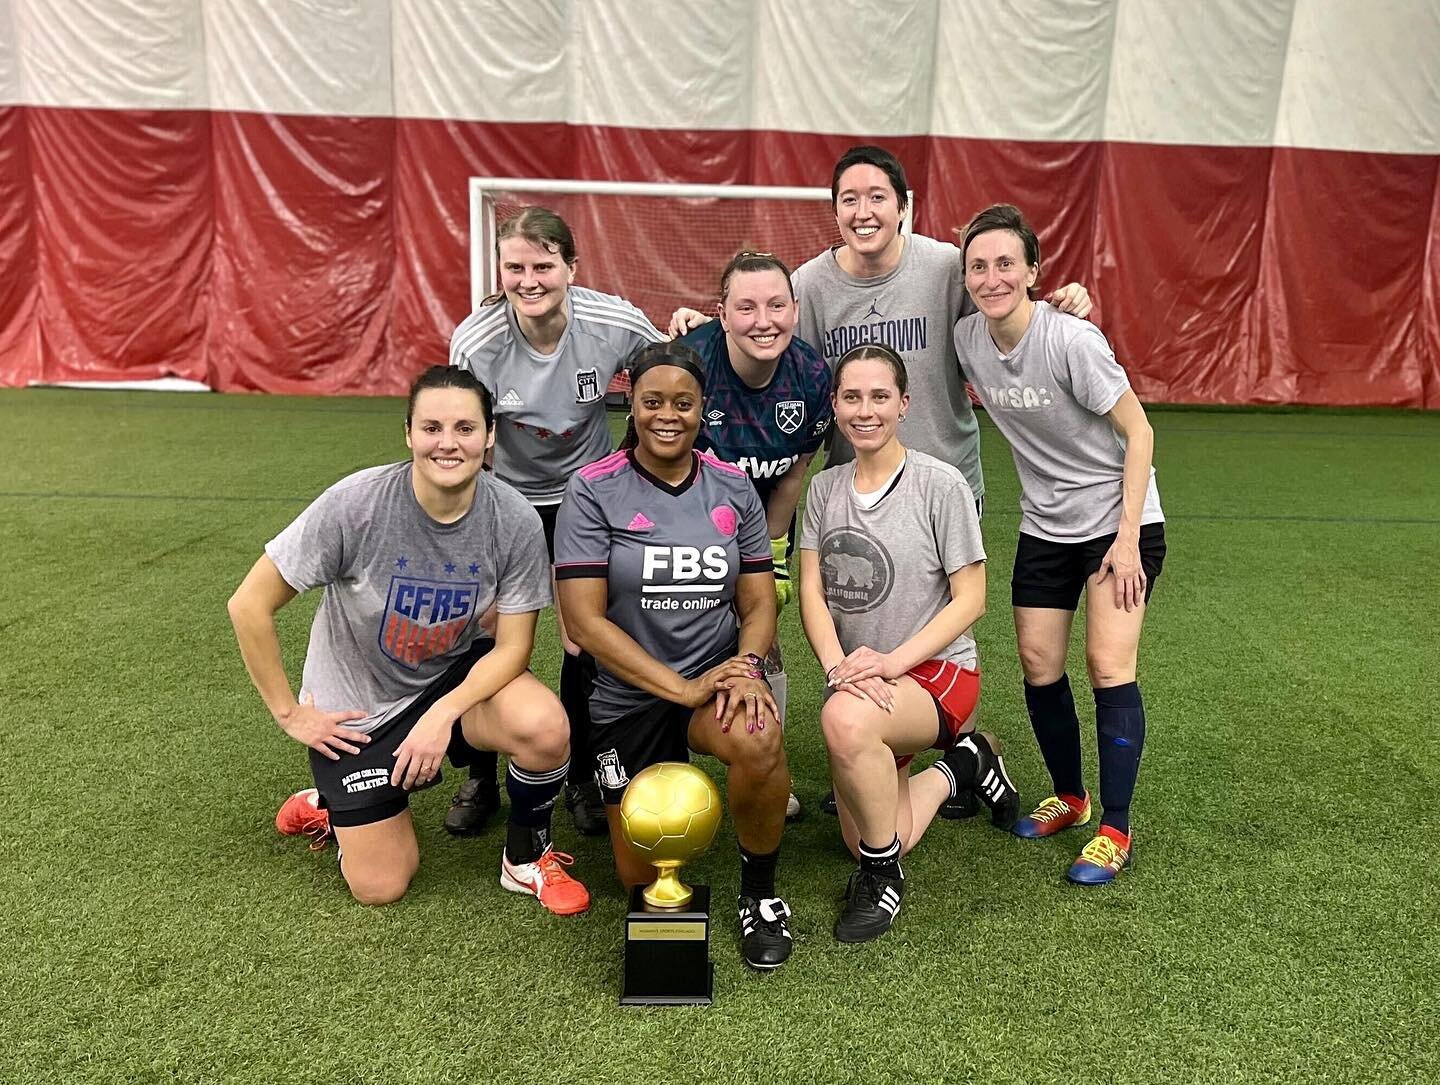 Look who&rsquo;s rolling through! The Winter 2023 Friday Night Indoor Soccer Champs-Motley Crew!

Congratulations everyone!

Registration is open for the Spring outdoor season at the Fire Pitch! Click the link in bio to sign up ⚽️

Season Starts: 5/1